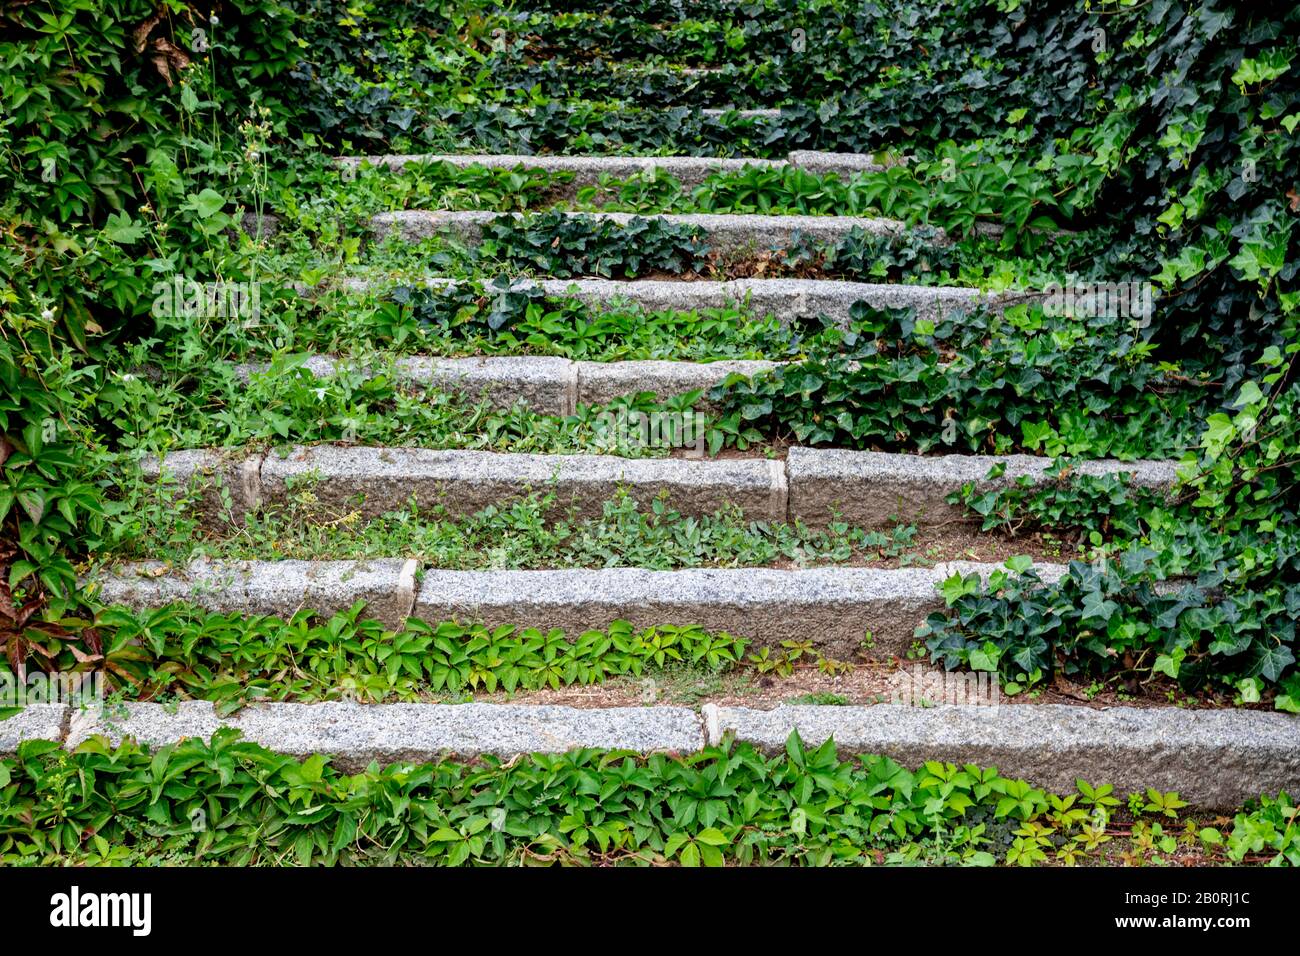 Stairs, overgrown, garden Campo del Moro, Madrid, Spain Stock Photo